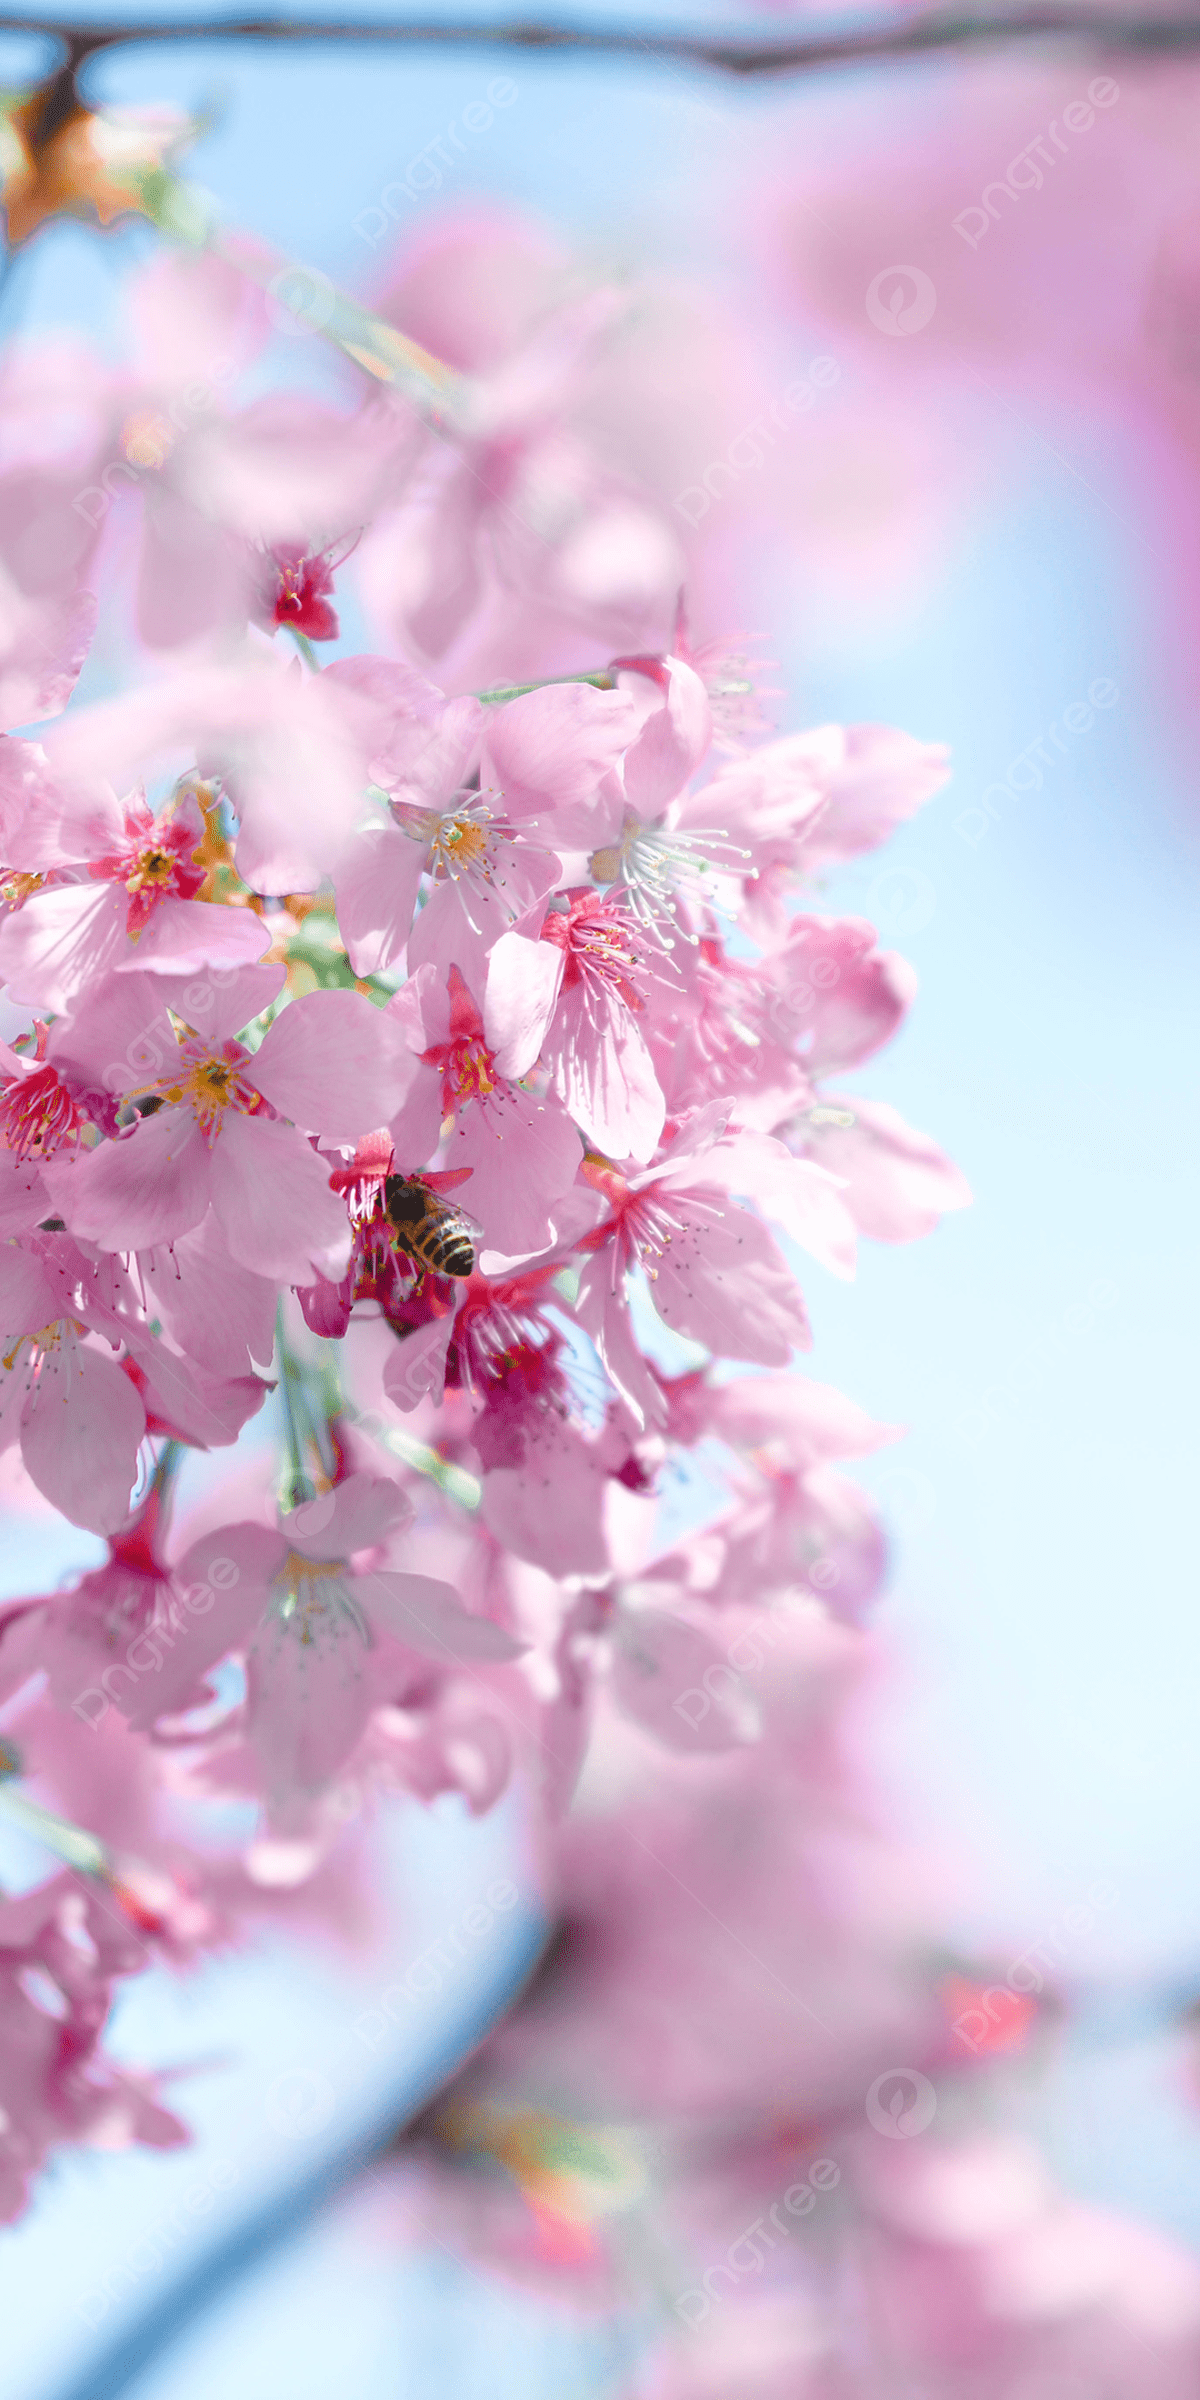 Sakura Vertical Photography Picture Spring Pink Cherry Blossoms Phone Wallpaper Background, Sakura, Cherry Blossoms, Spring Background Image for Free Download